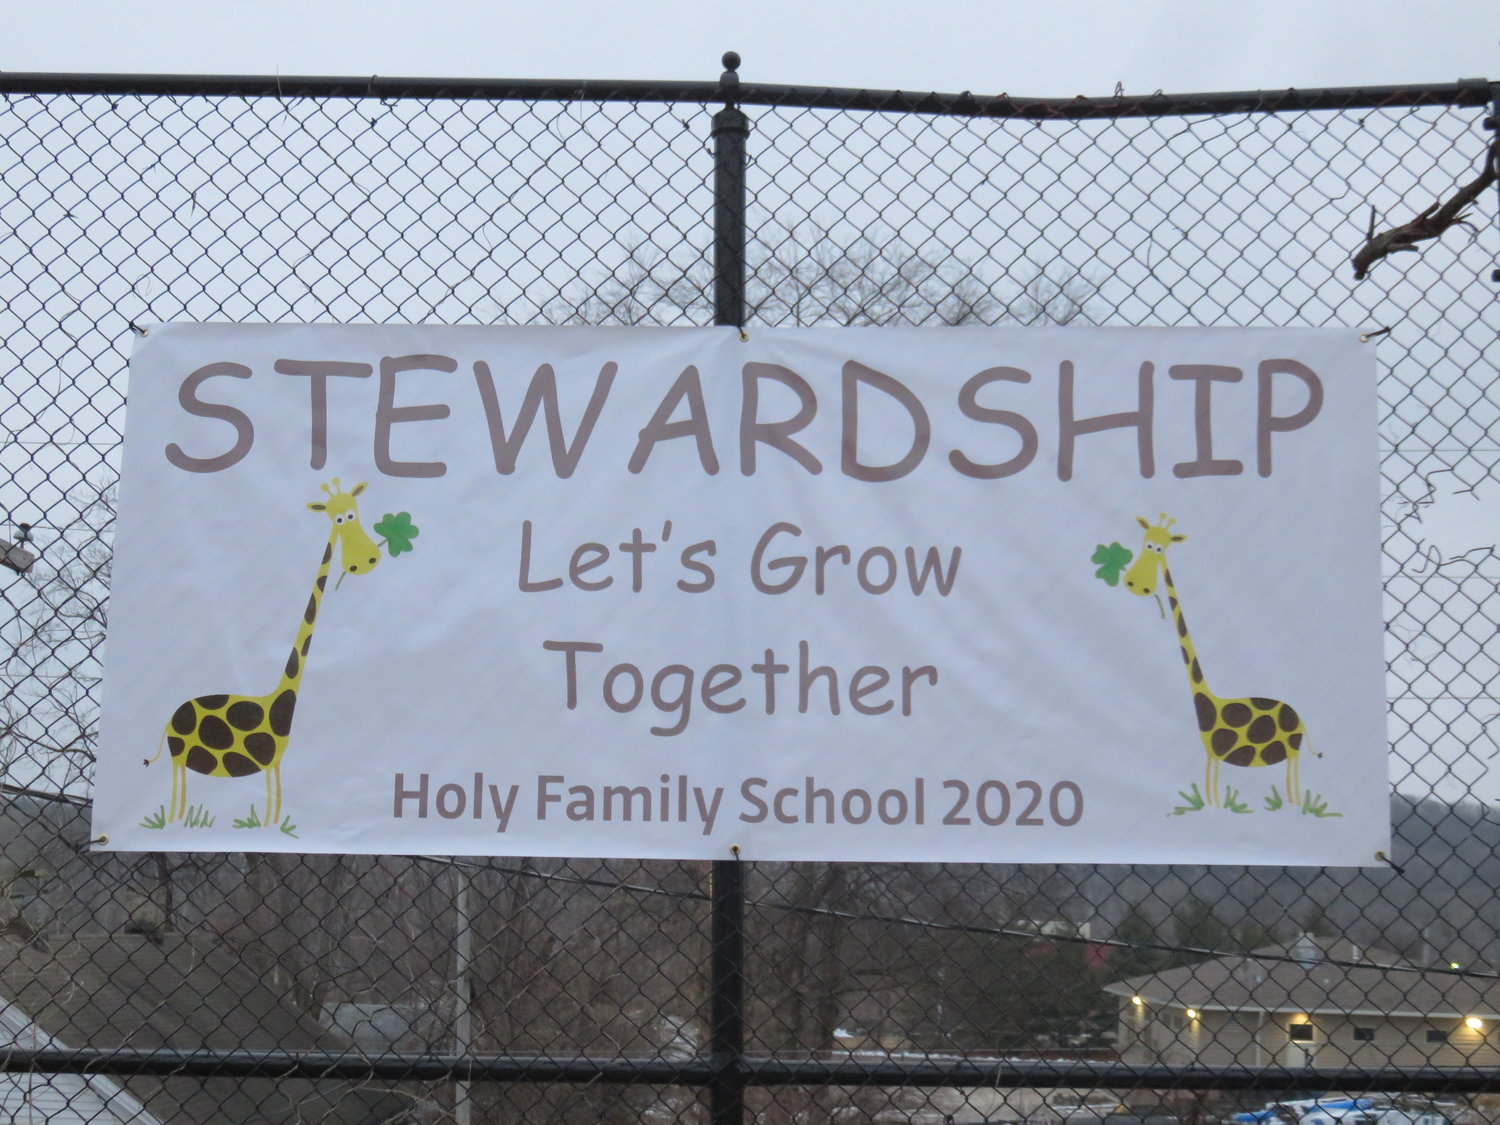 This stewardship bulletin board is located near the entrance to Holy Family School.